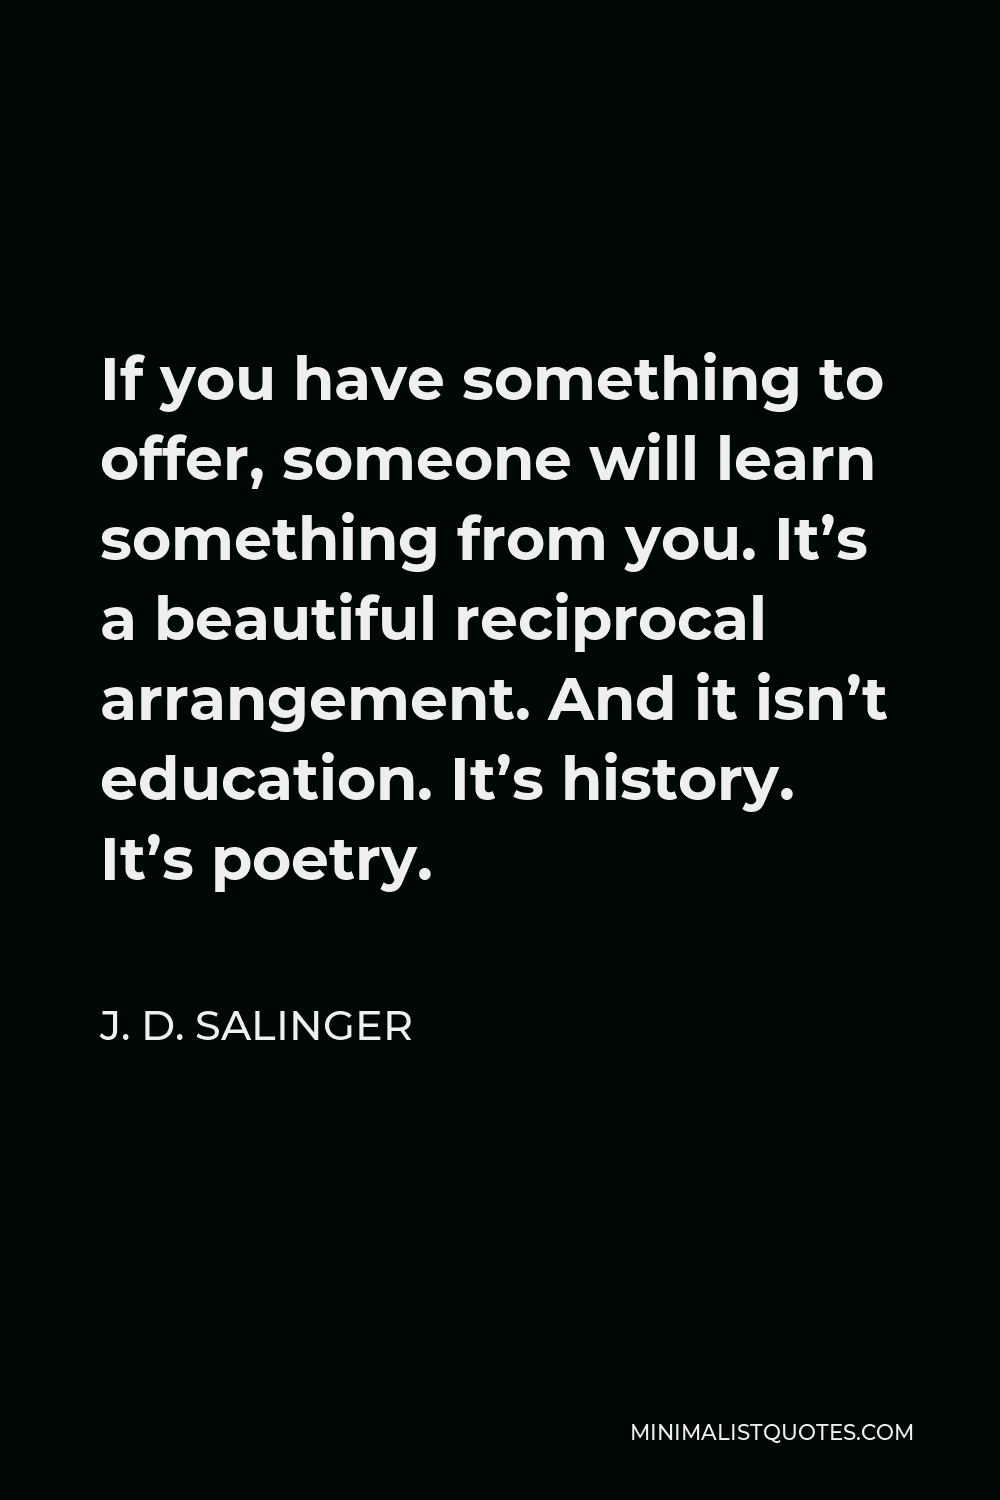 J. D. Salinger Quote - If you have something to offer, someone will learn something from you. It’s a beautiful reciprocal arrangement. And it isn’t education. It’s history. It’s poetry.